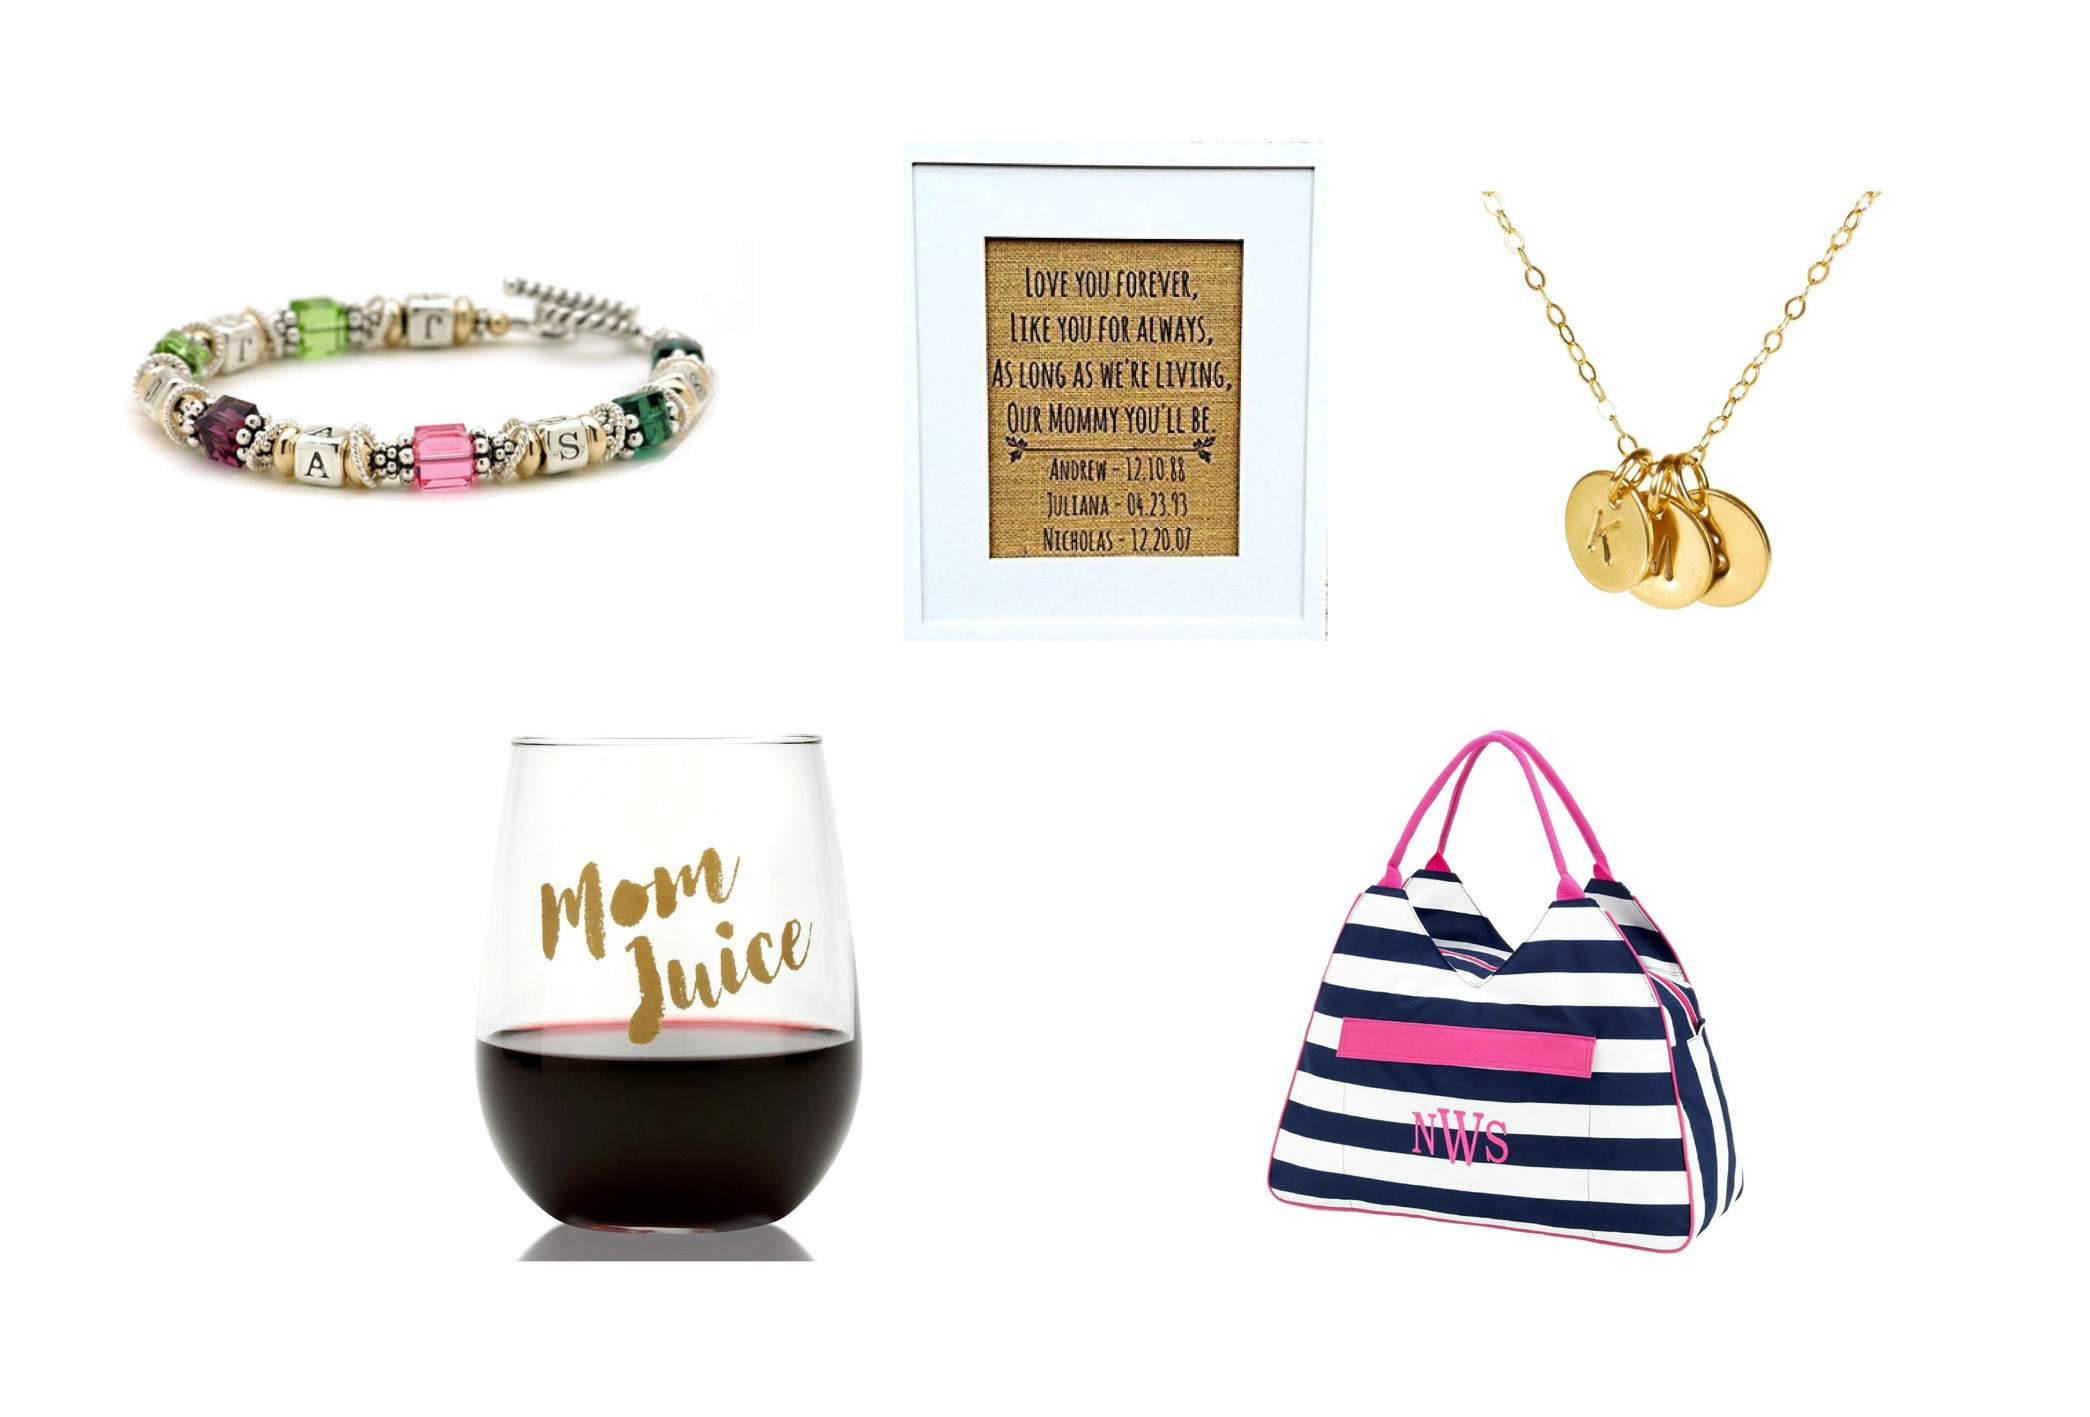 New Mother'S Day Gift Ideas
 Top 10 Best Personalized Mother’s Day Gifts for New Moms